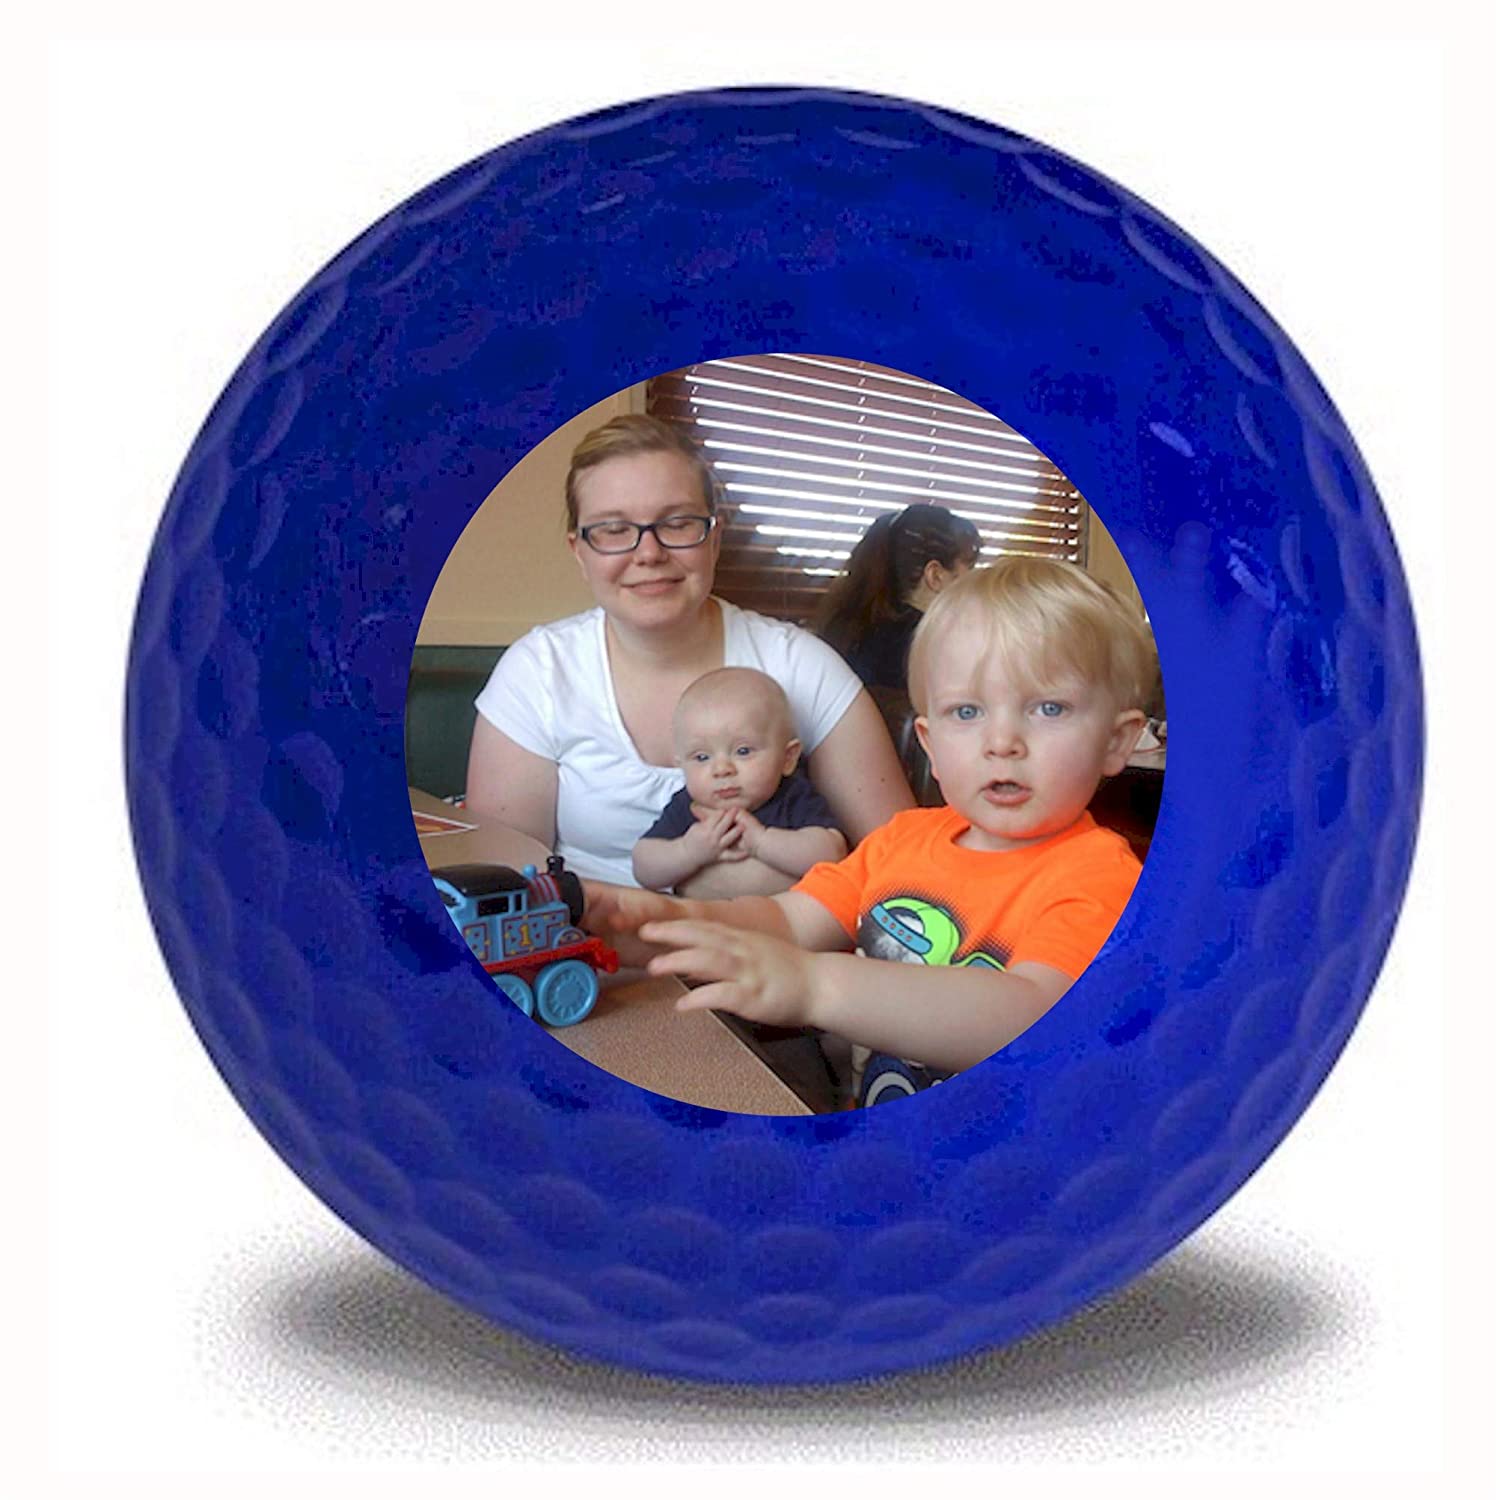 Personalized Photo Golf Balls, Blue, 12 Pack - image 4 of 4